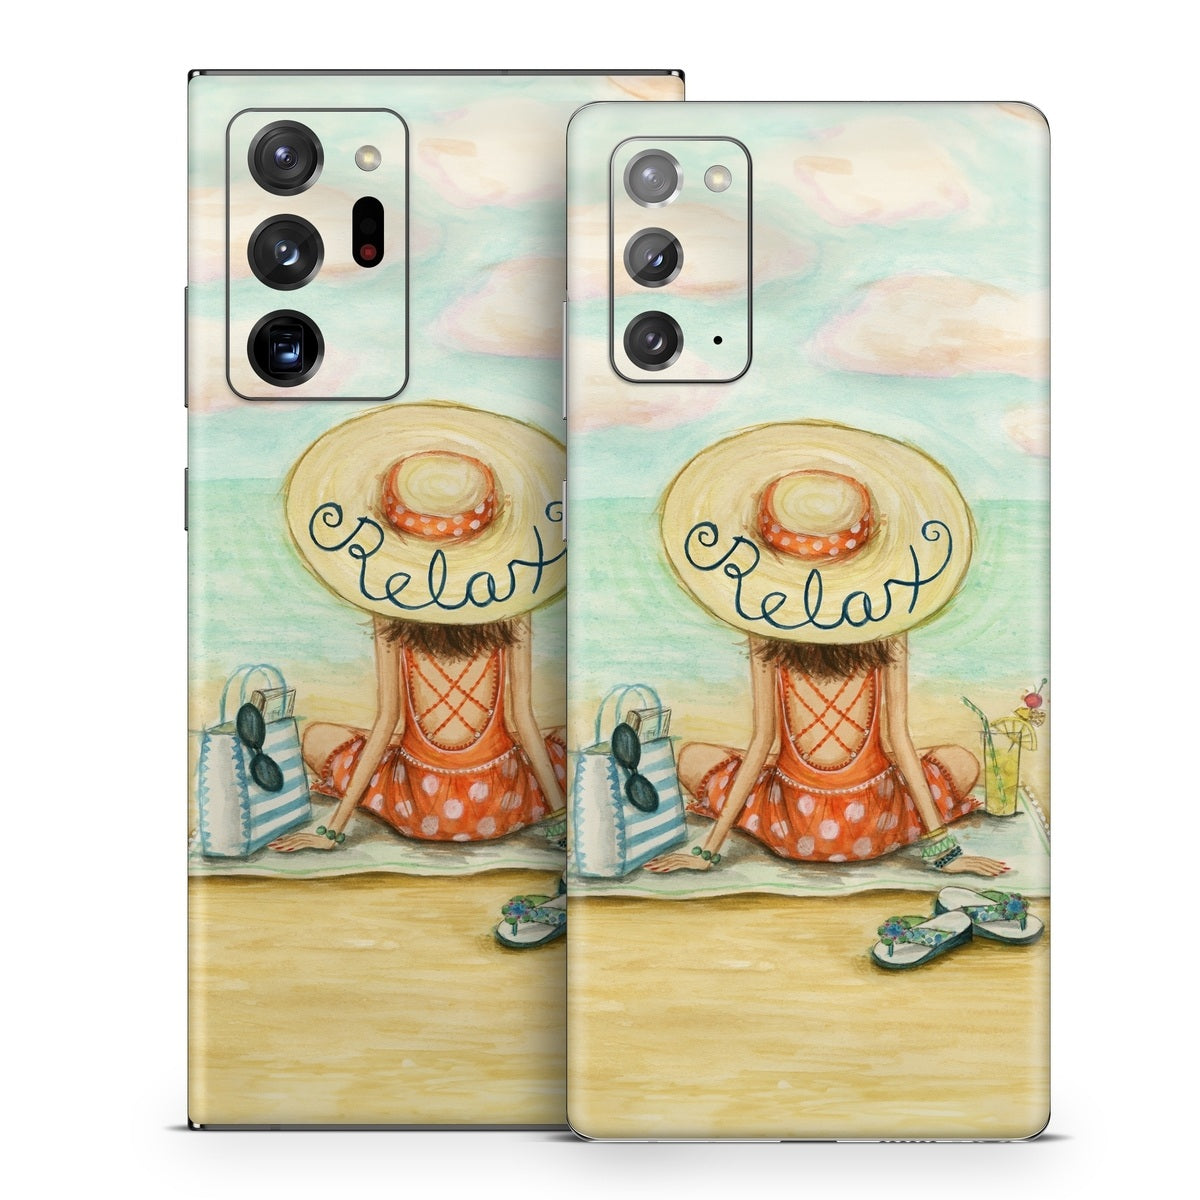 Relaxing on Beach - Samsung Galaxy Note 20 Skin